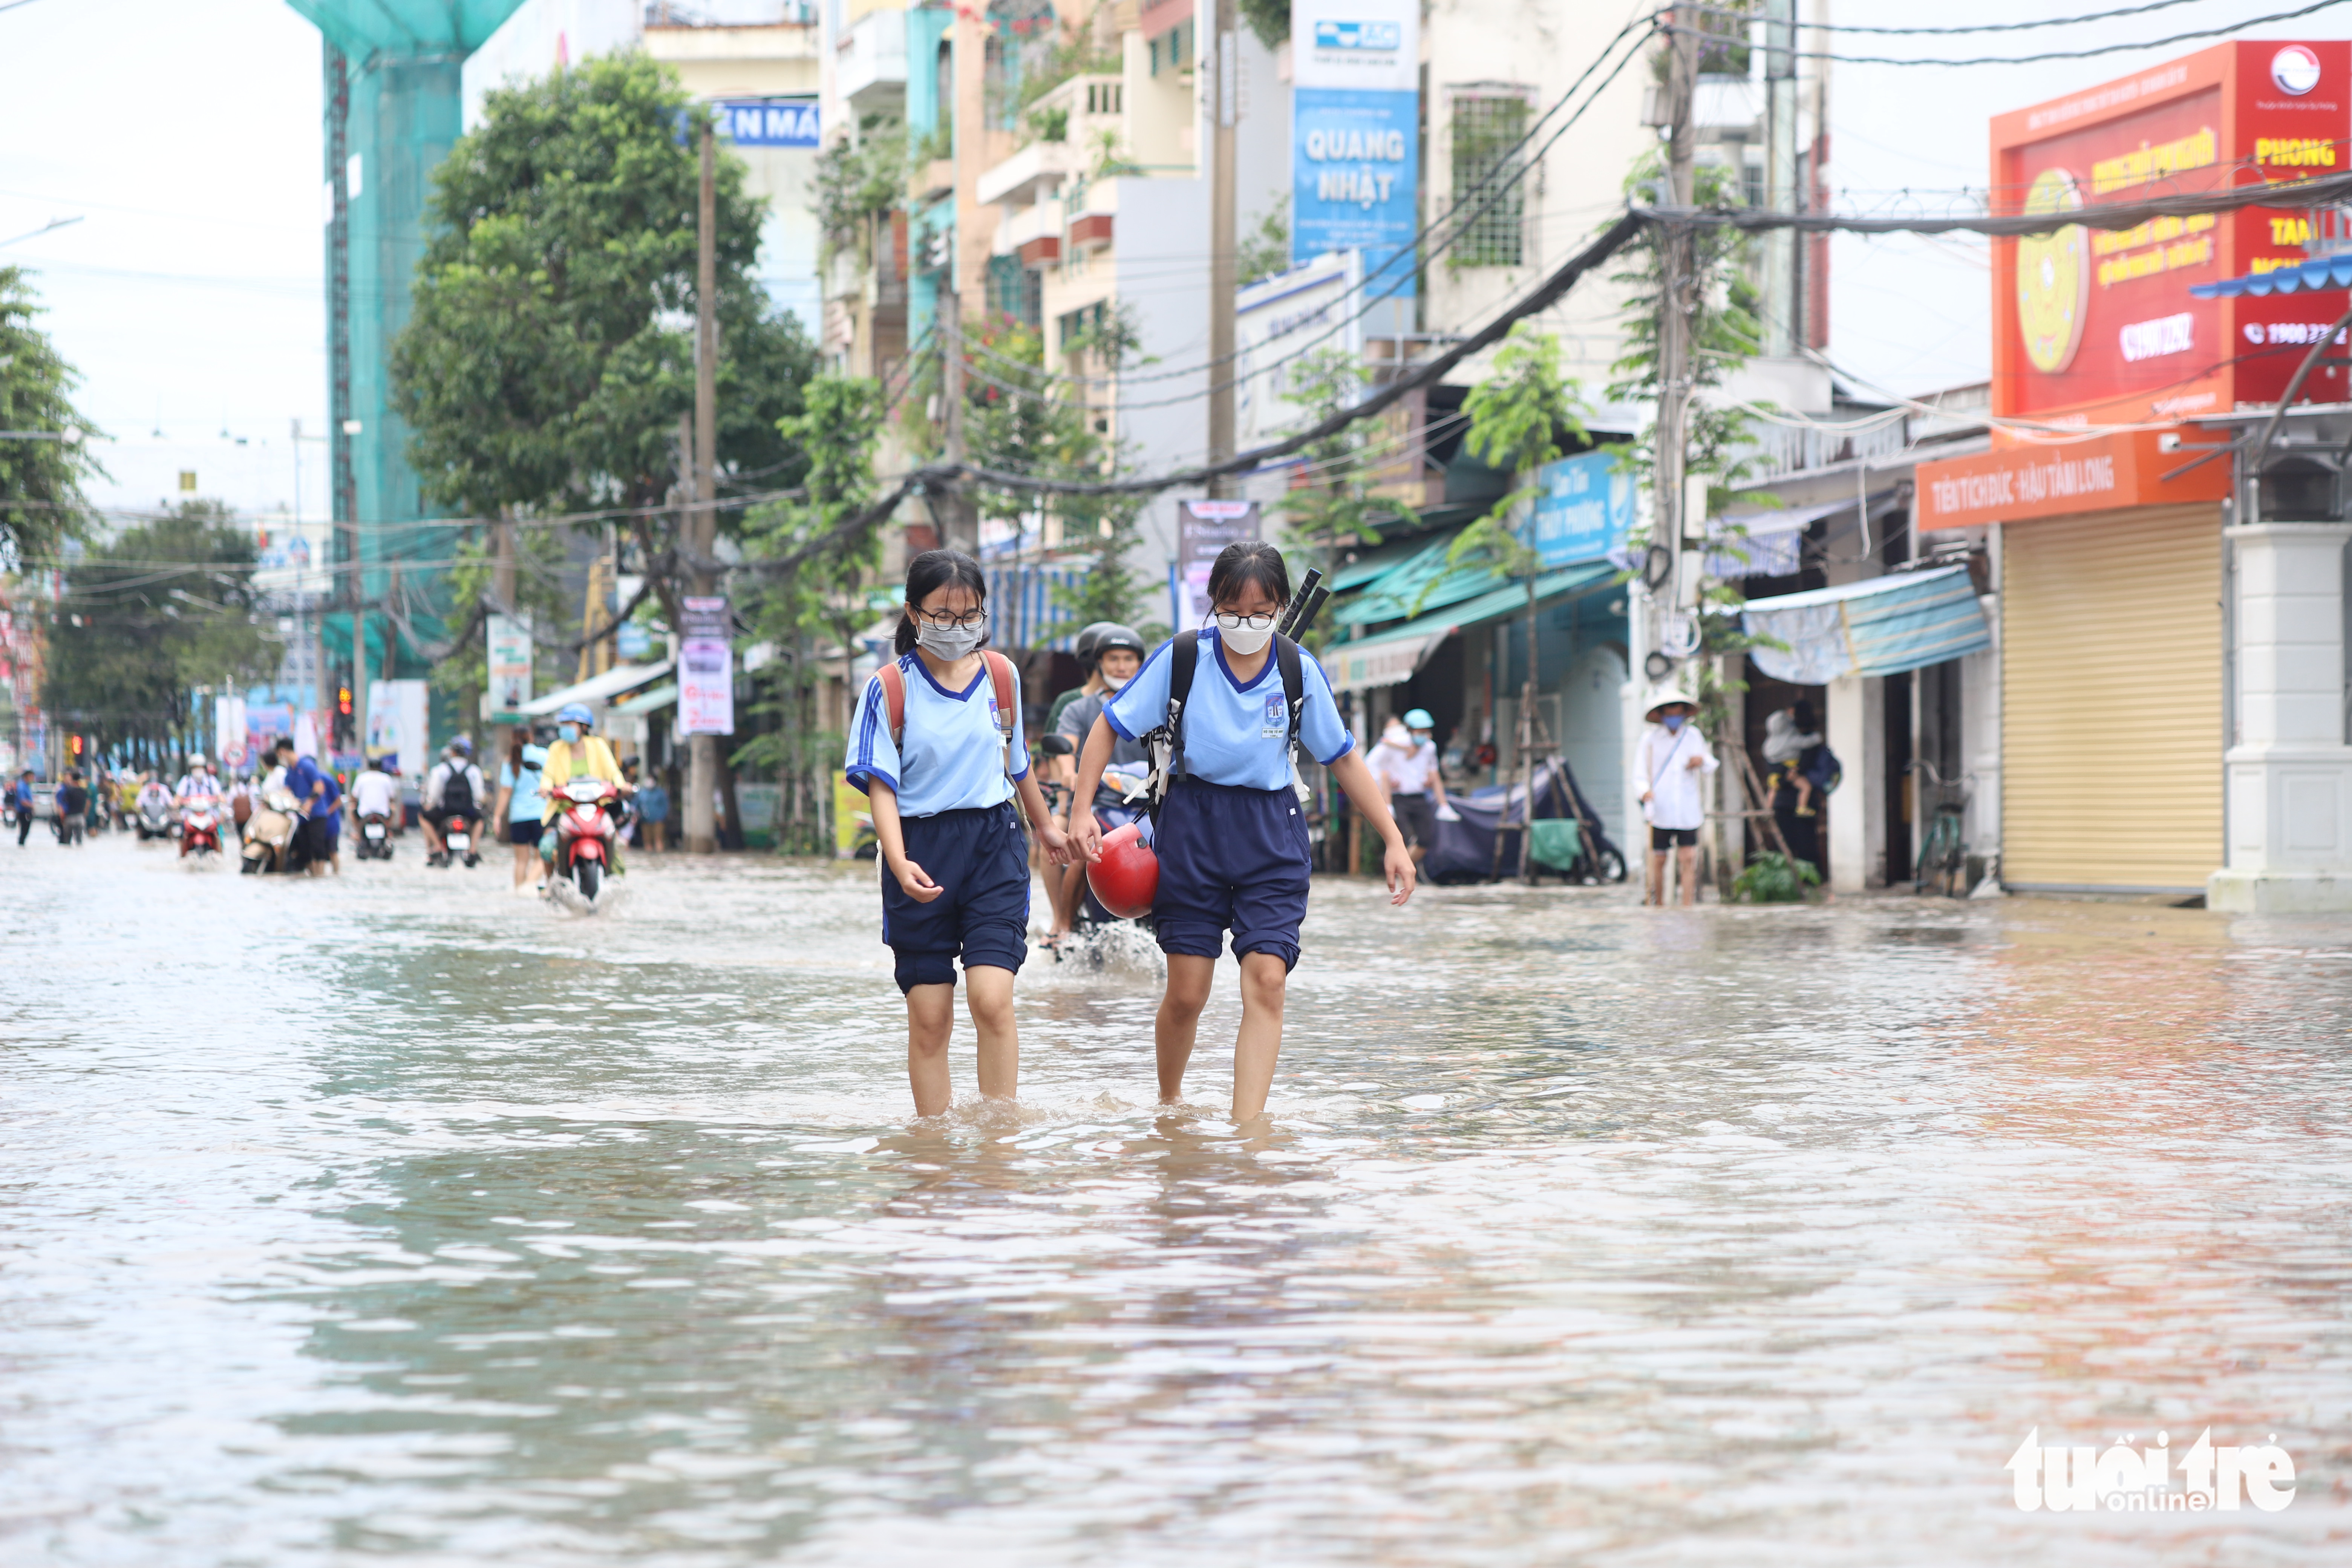 Students walk on an inundated street in Can Tho City, Vietnam, October 10, 2022. Photo: Chi Quoc / Tuoi Tre